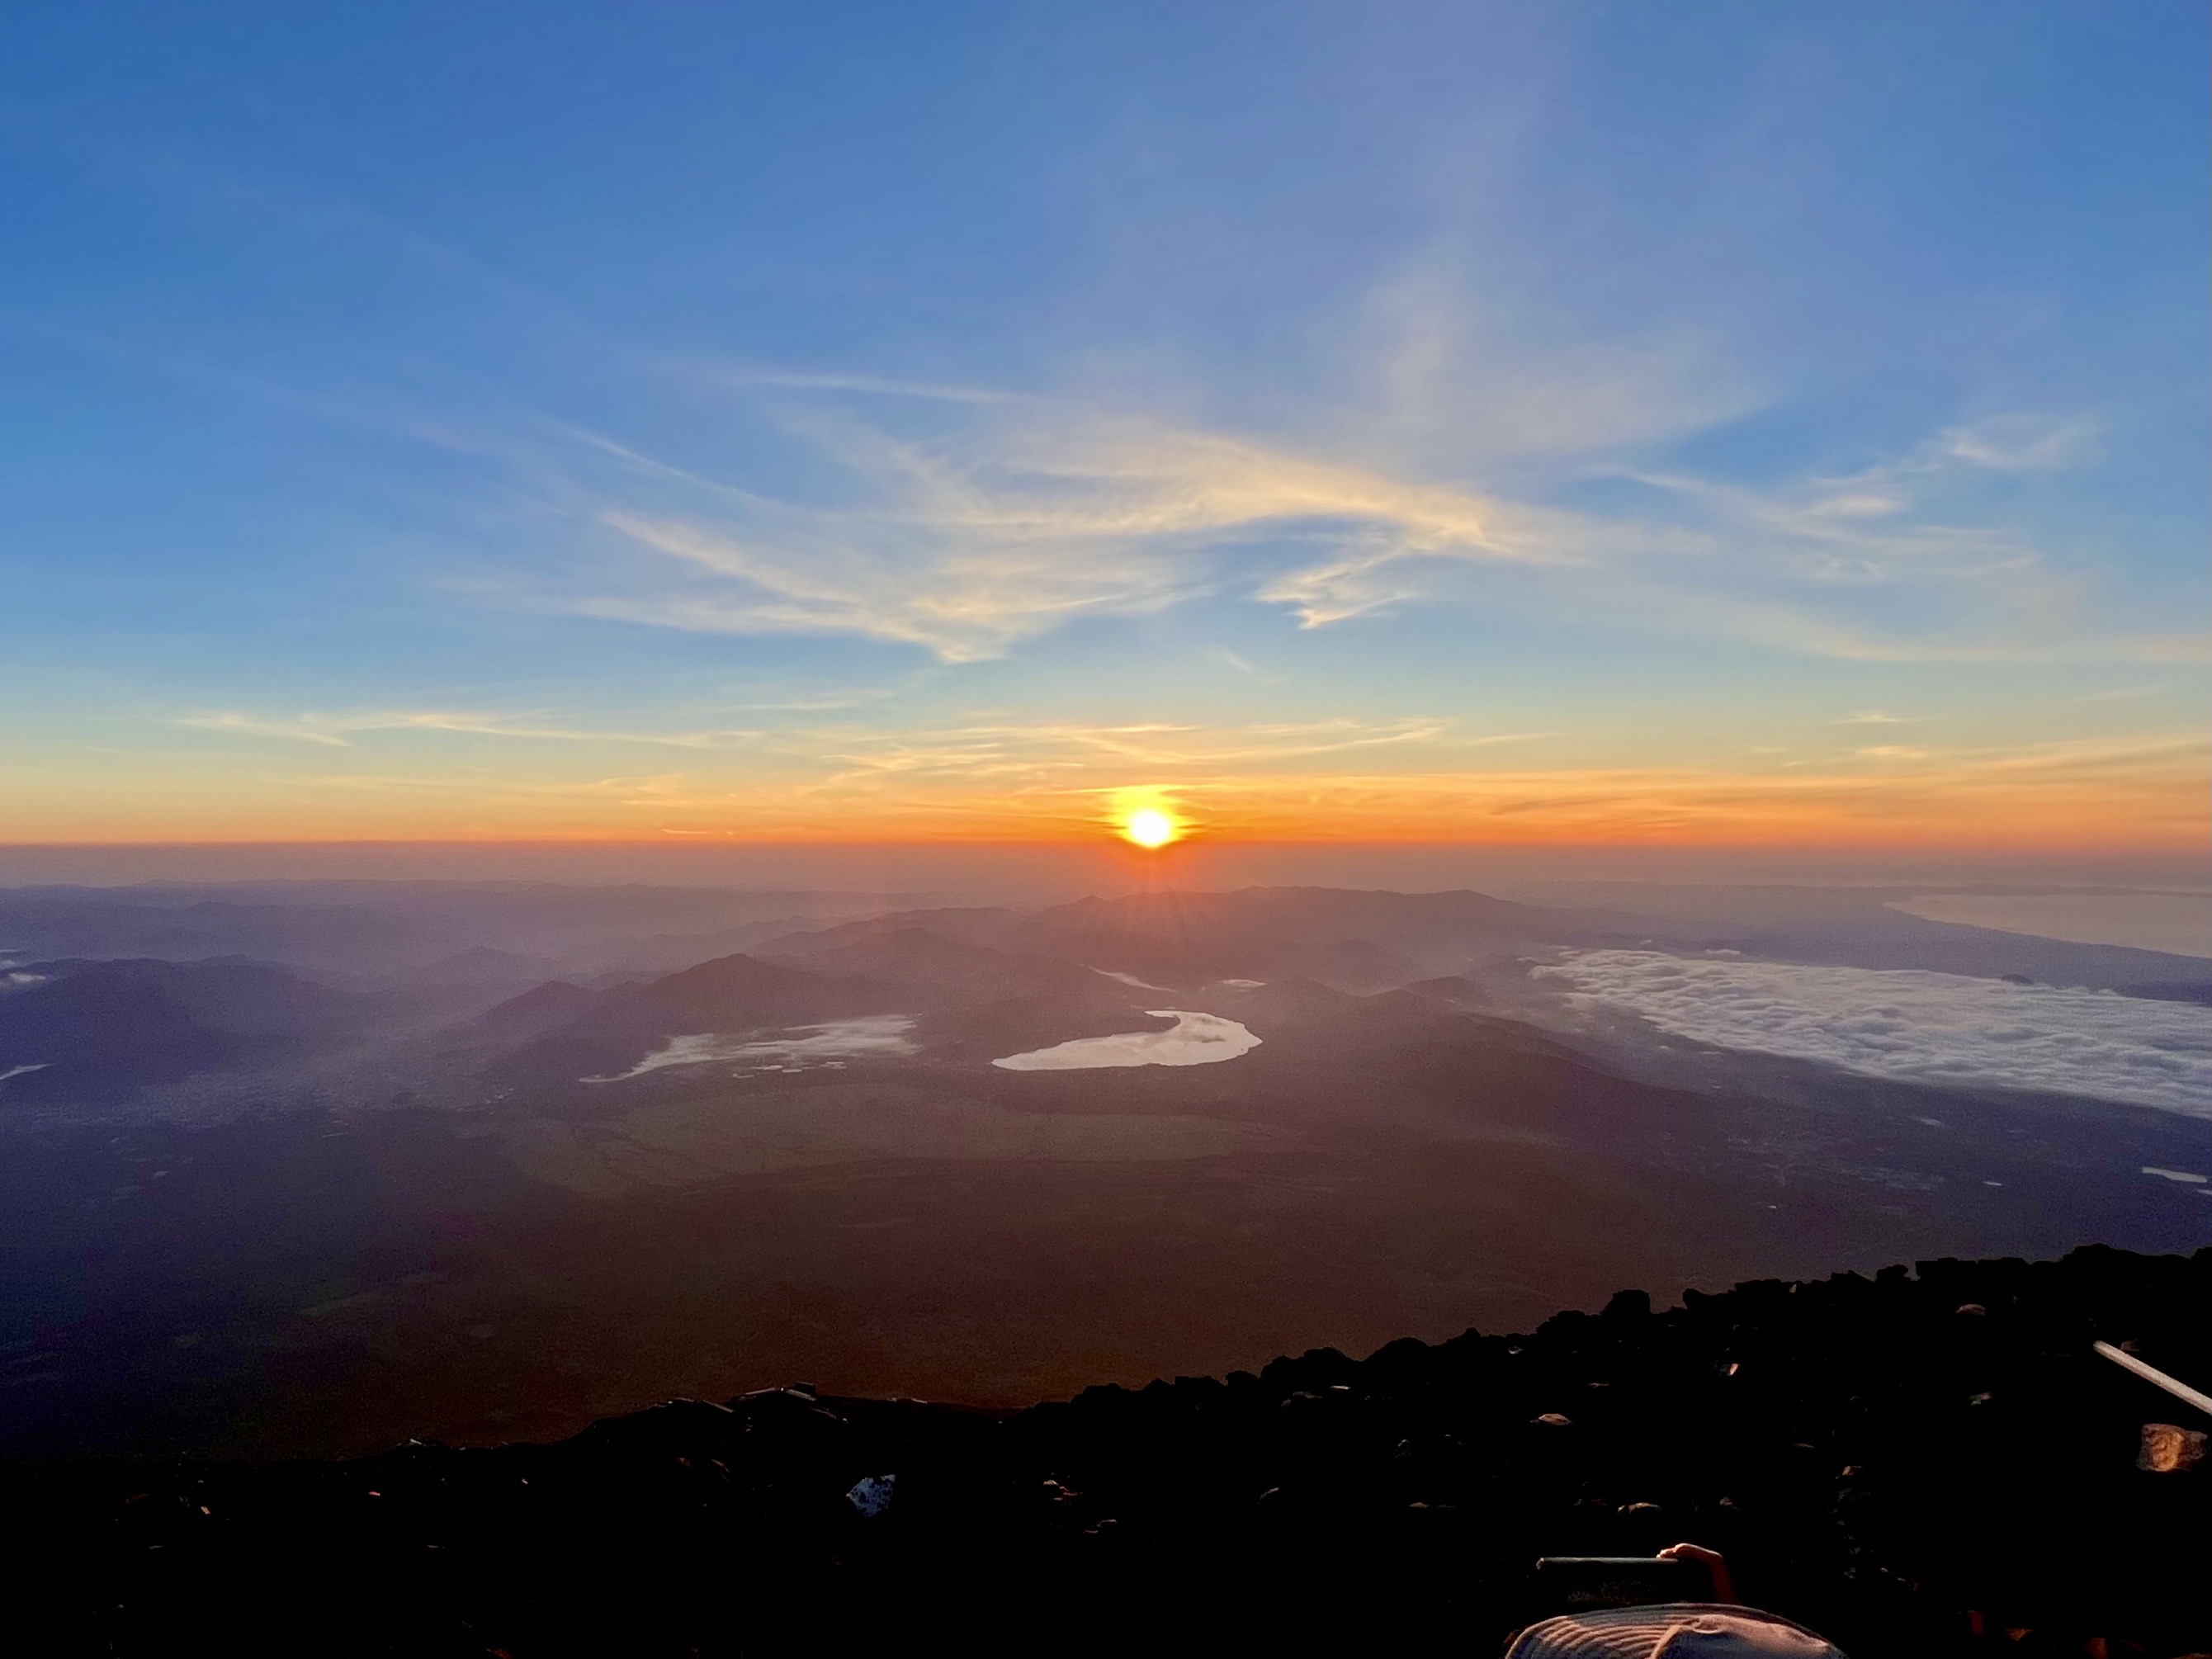 The view from the top of Mount Fuji at sunrise